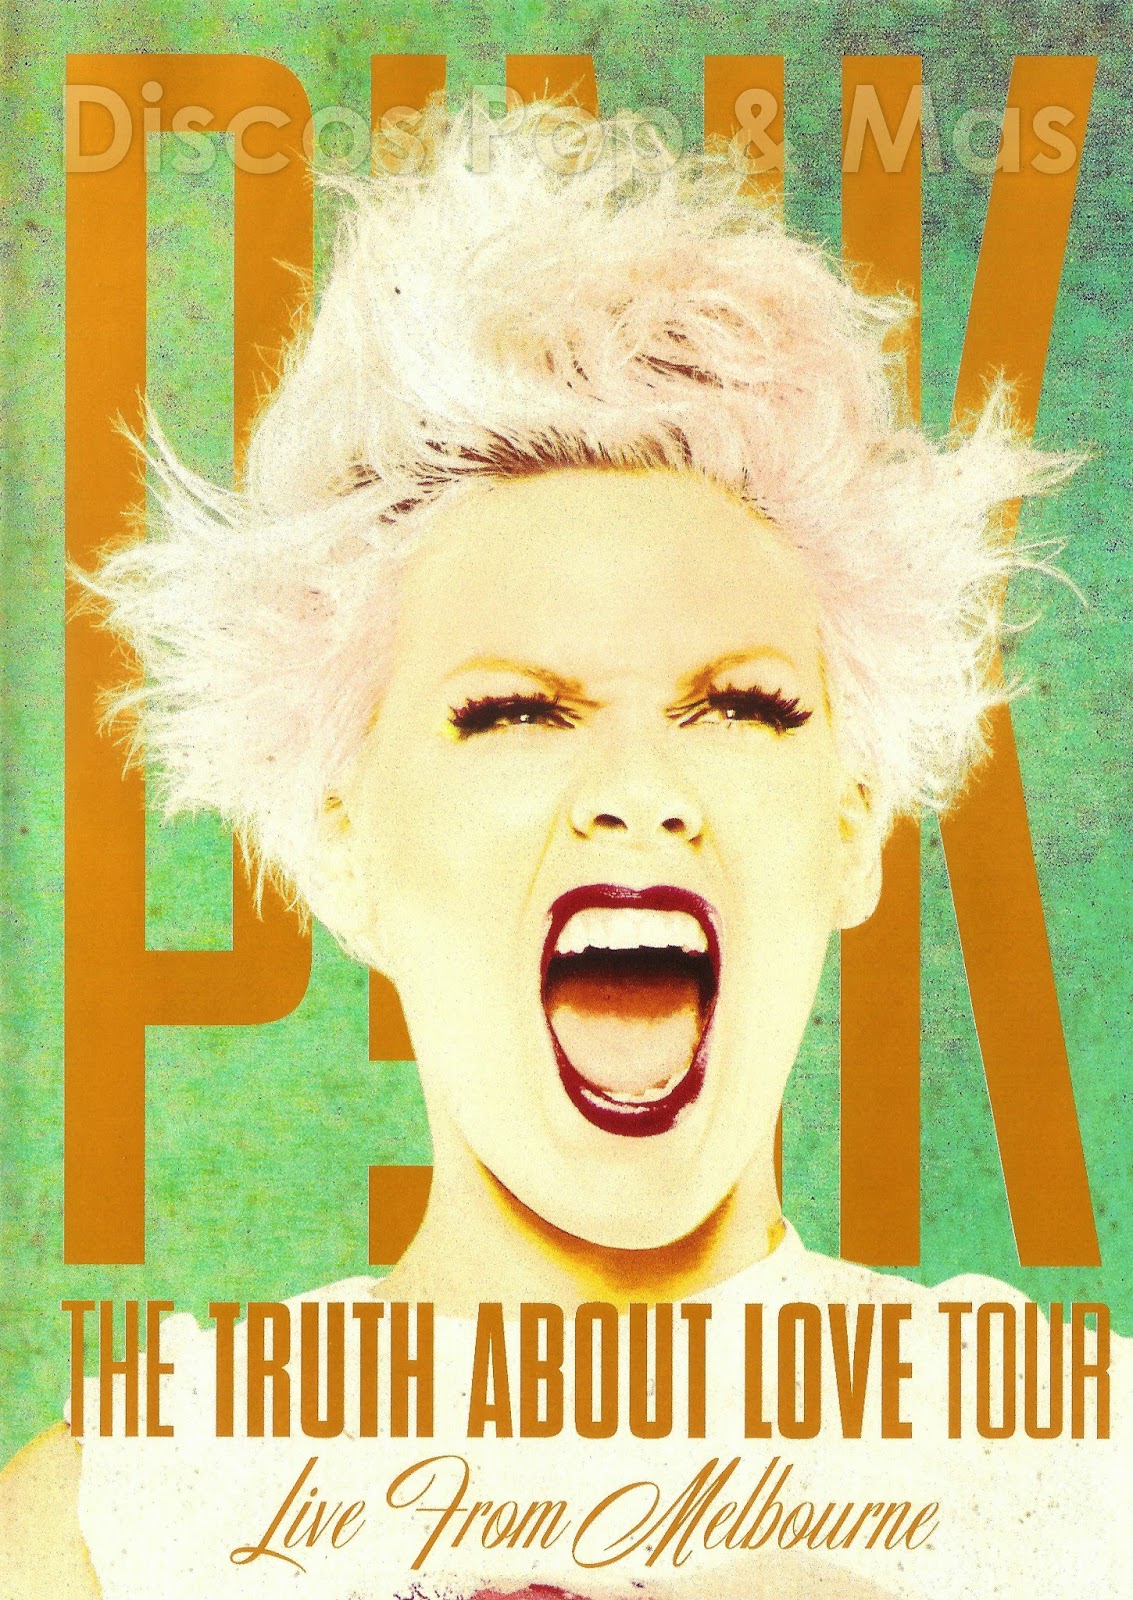 Discos Pop & Mas: P!nk - The Truth About Love